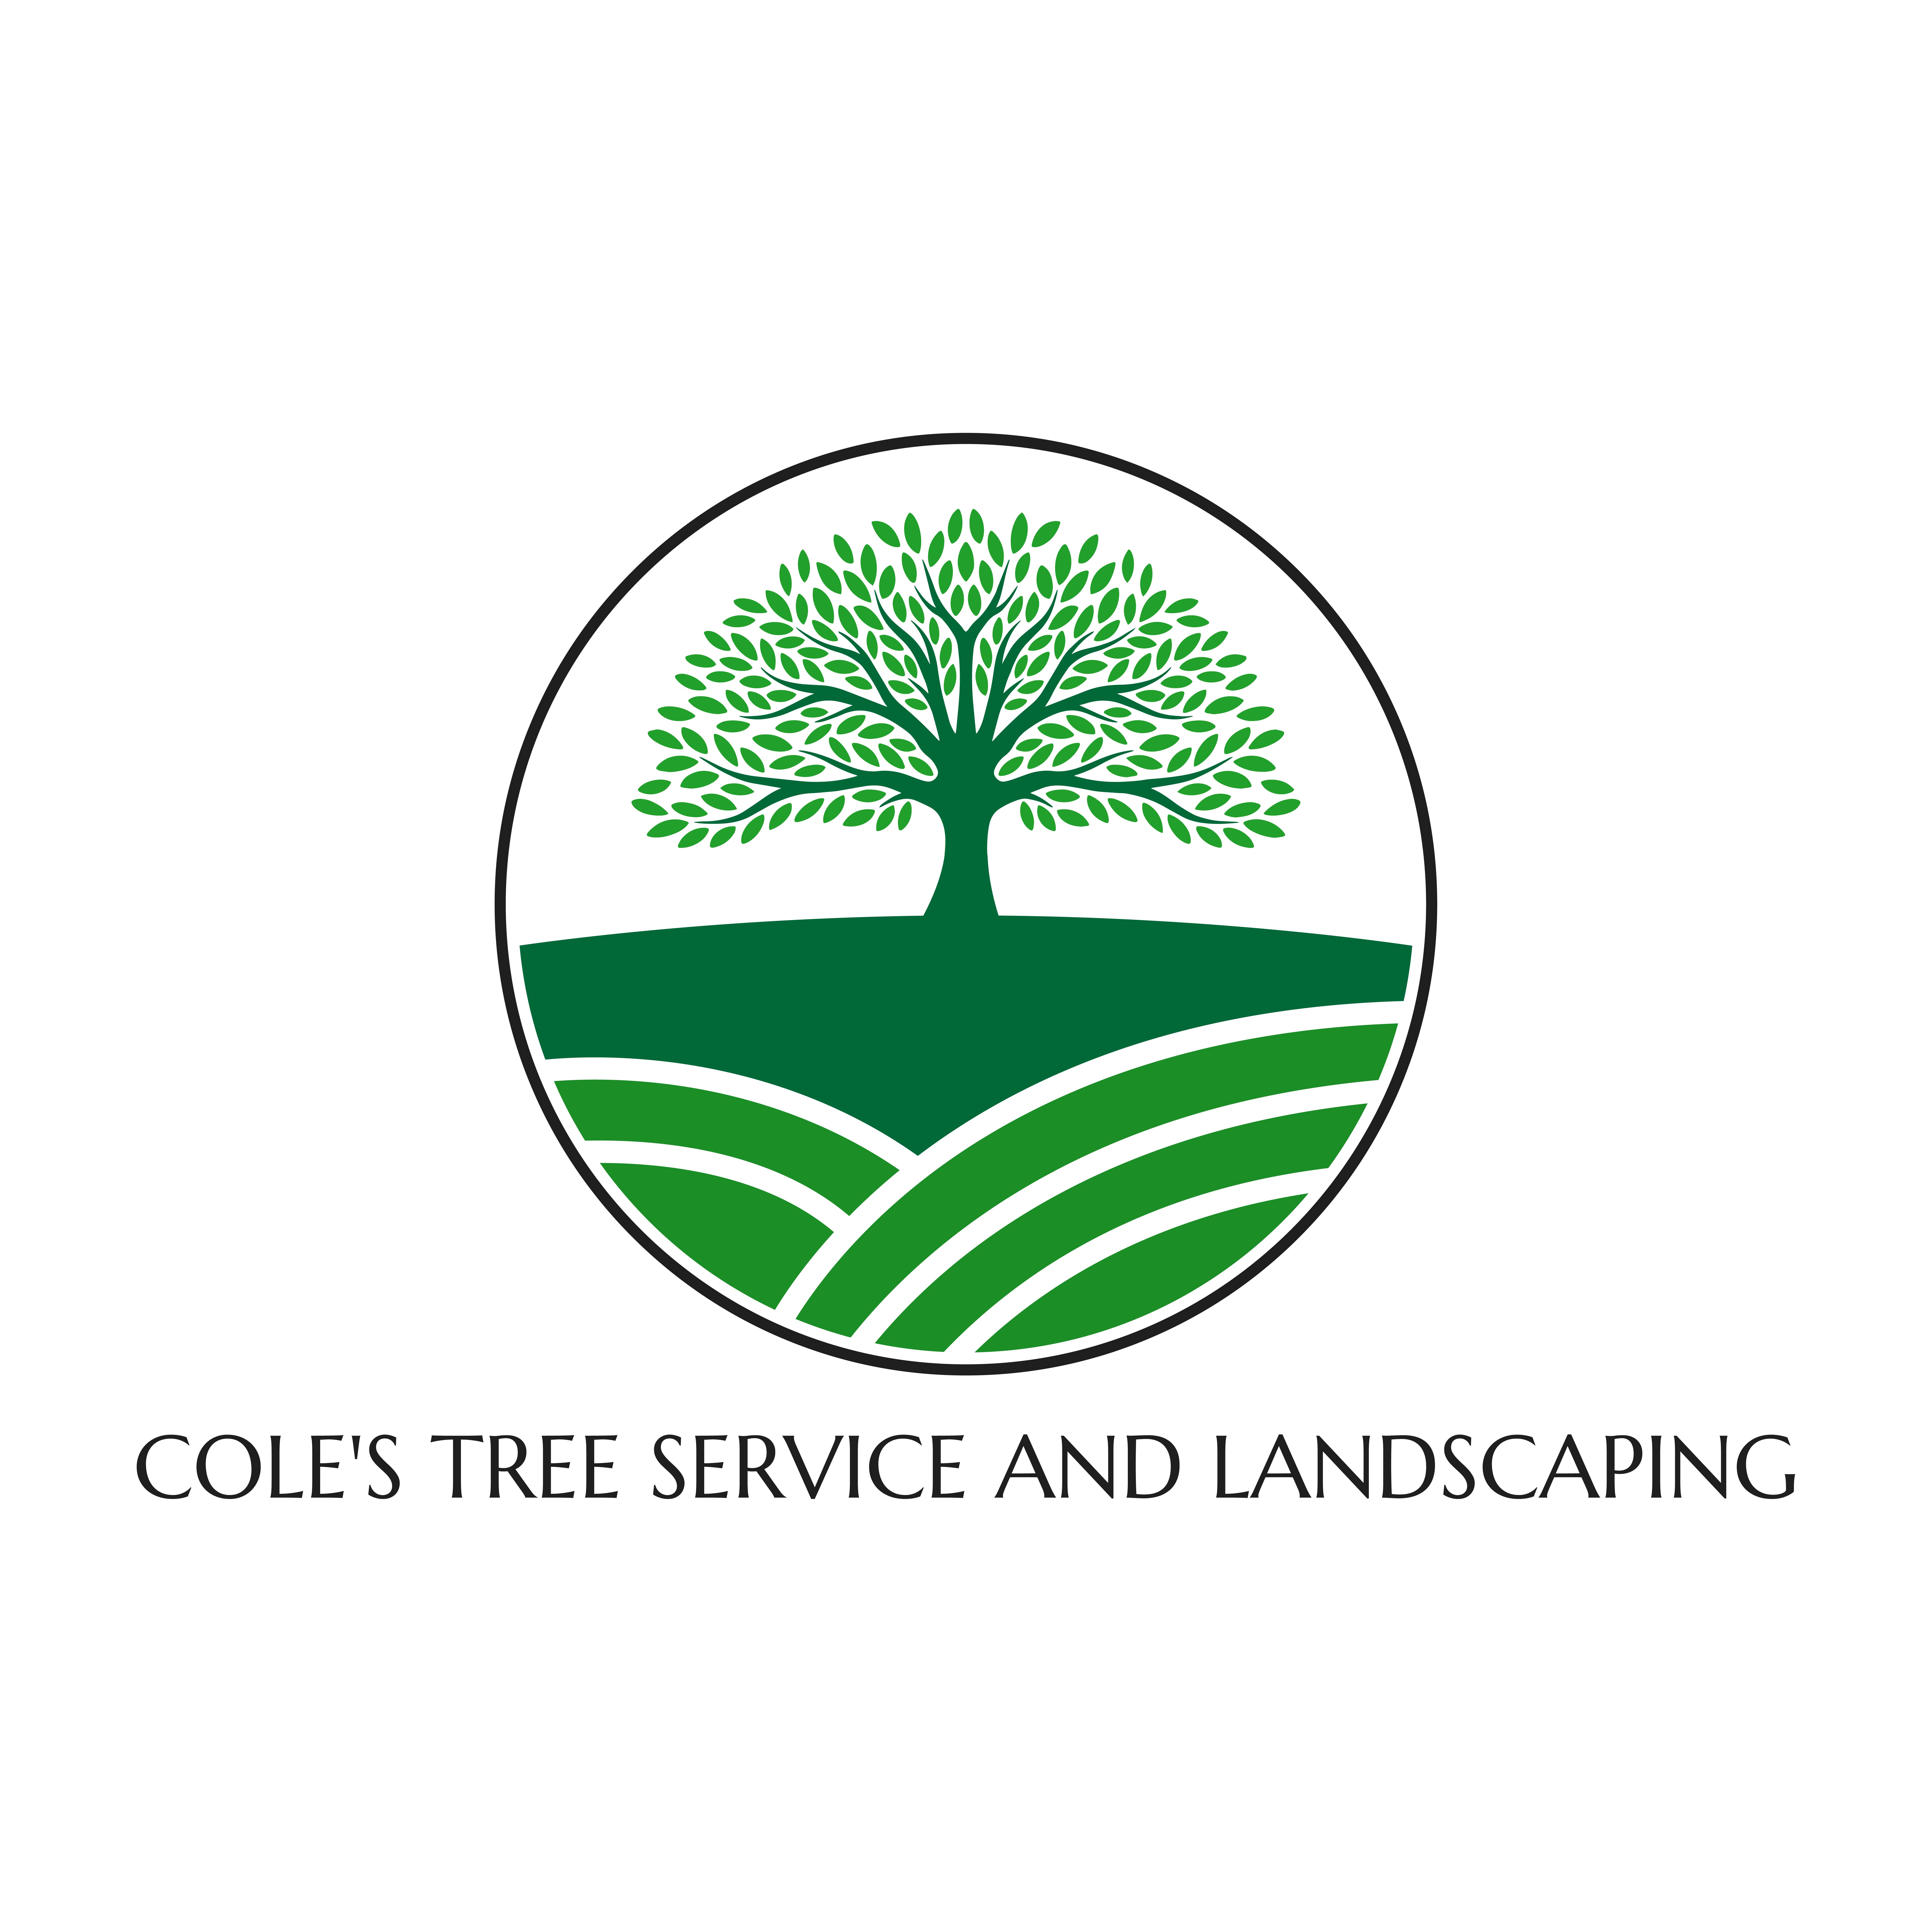 Cole's Tree Service and Landscaping Logo